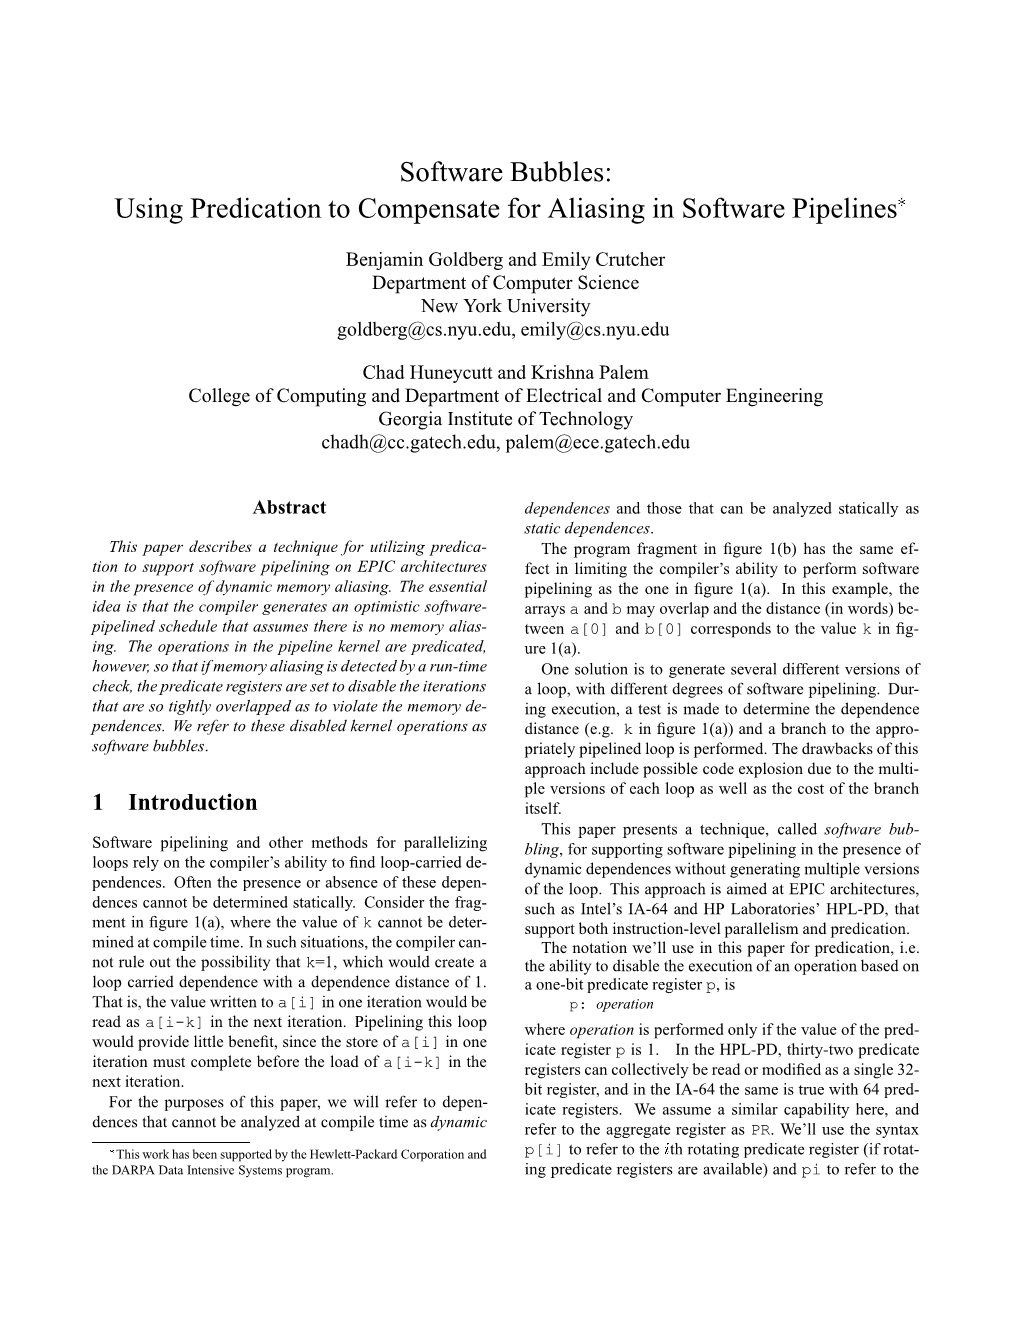 Software Bubbles: Using Predication to Compensate for Aliasing in Software Pipelines